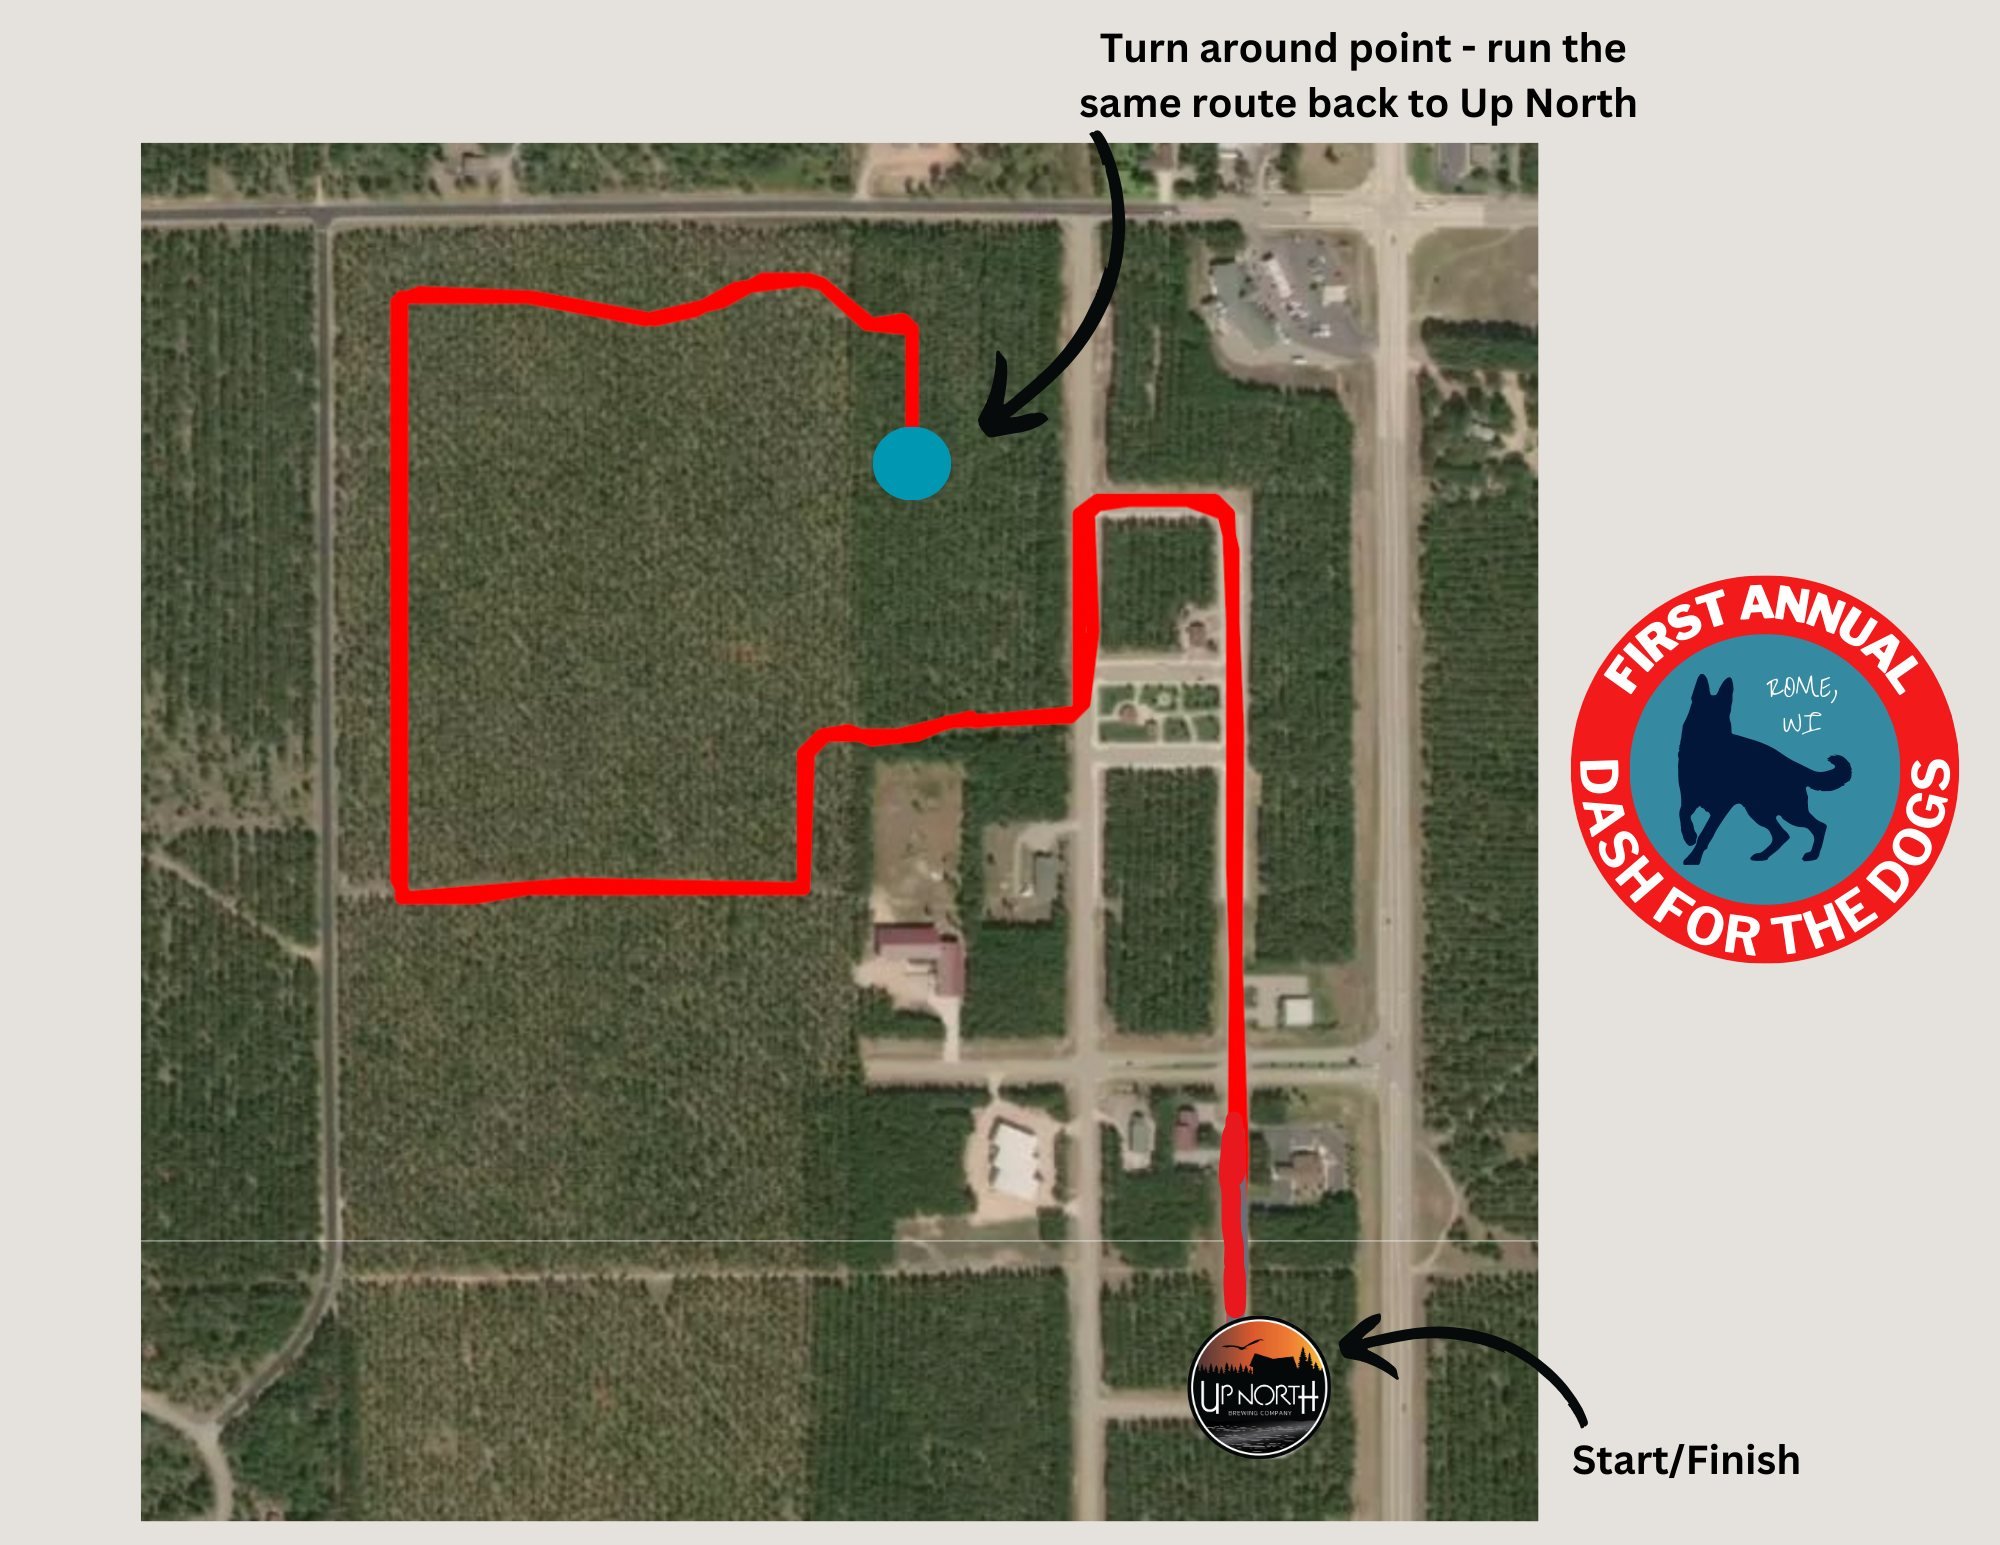 The route for Saturday's &quot;Dash for the Dogs&quot; event may look a little familiar to those who have attended the Up North Brewing Company's &quot;Run Club&quot; gatherings. Truth be told, we're using the same route! Spanning about a 5K length, 